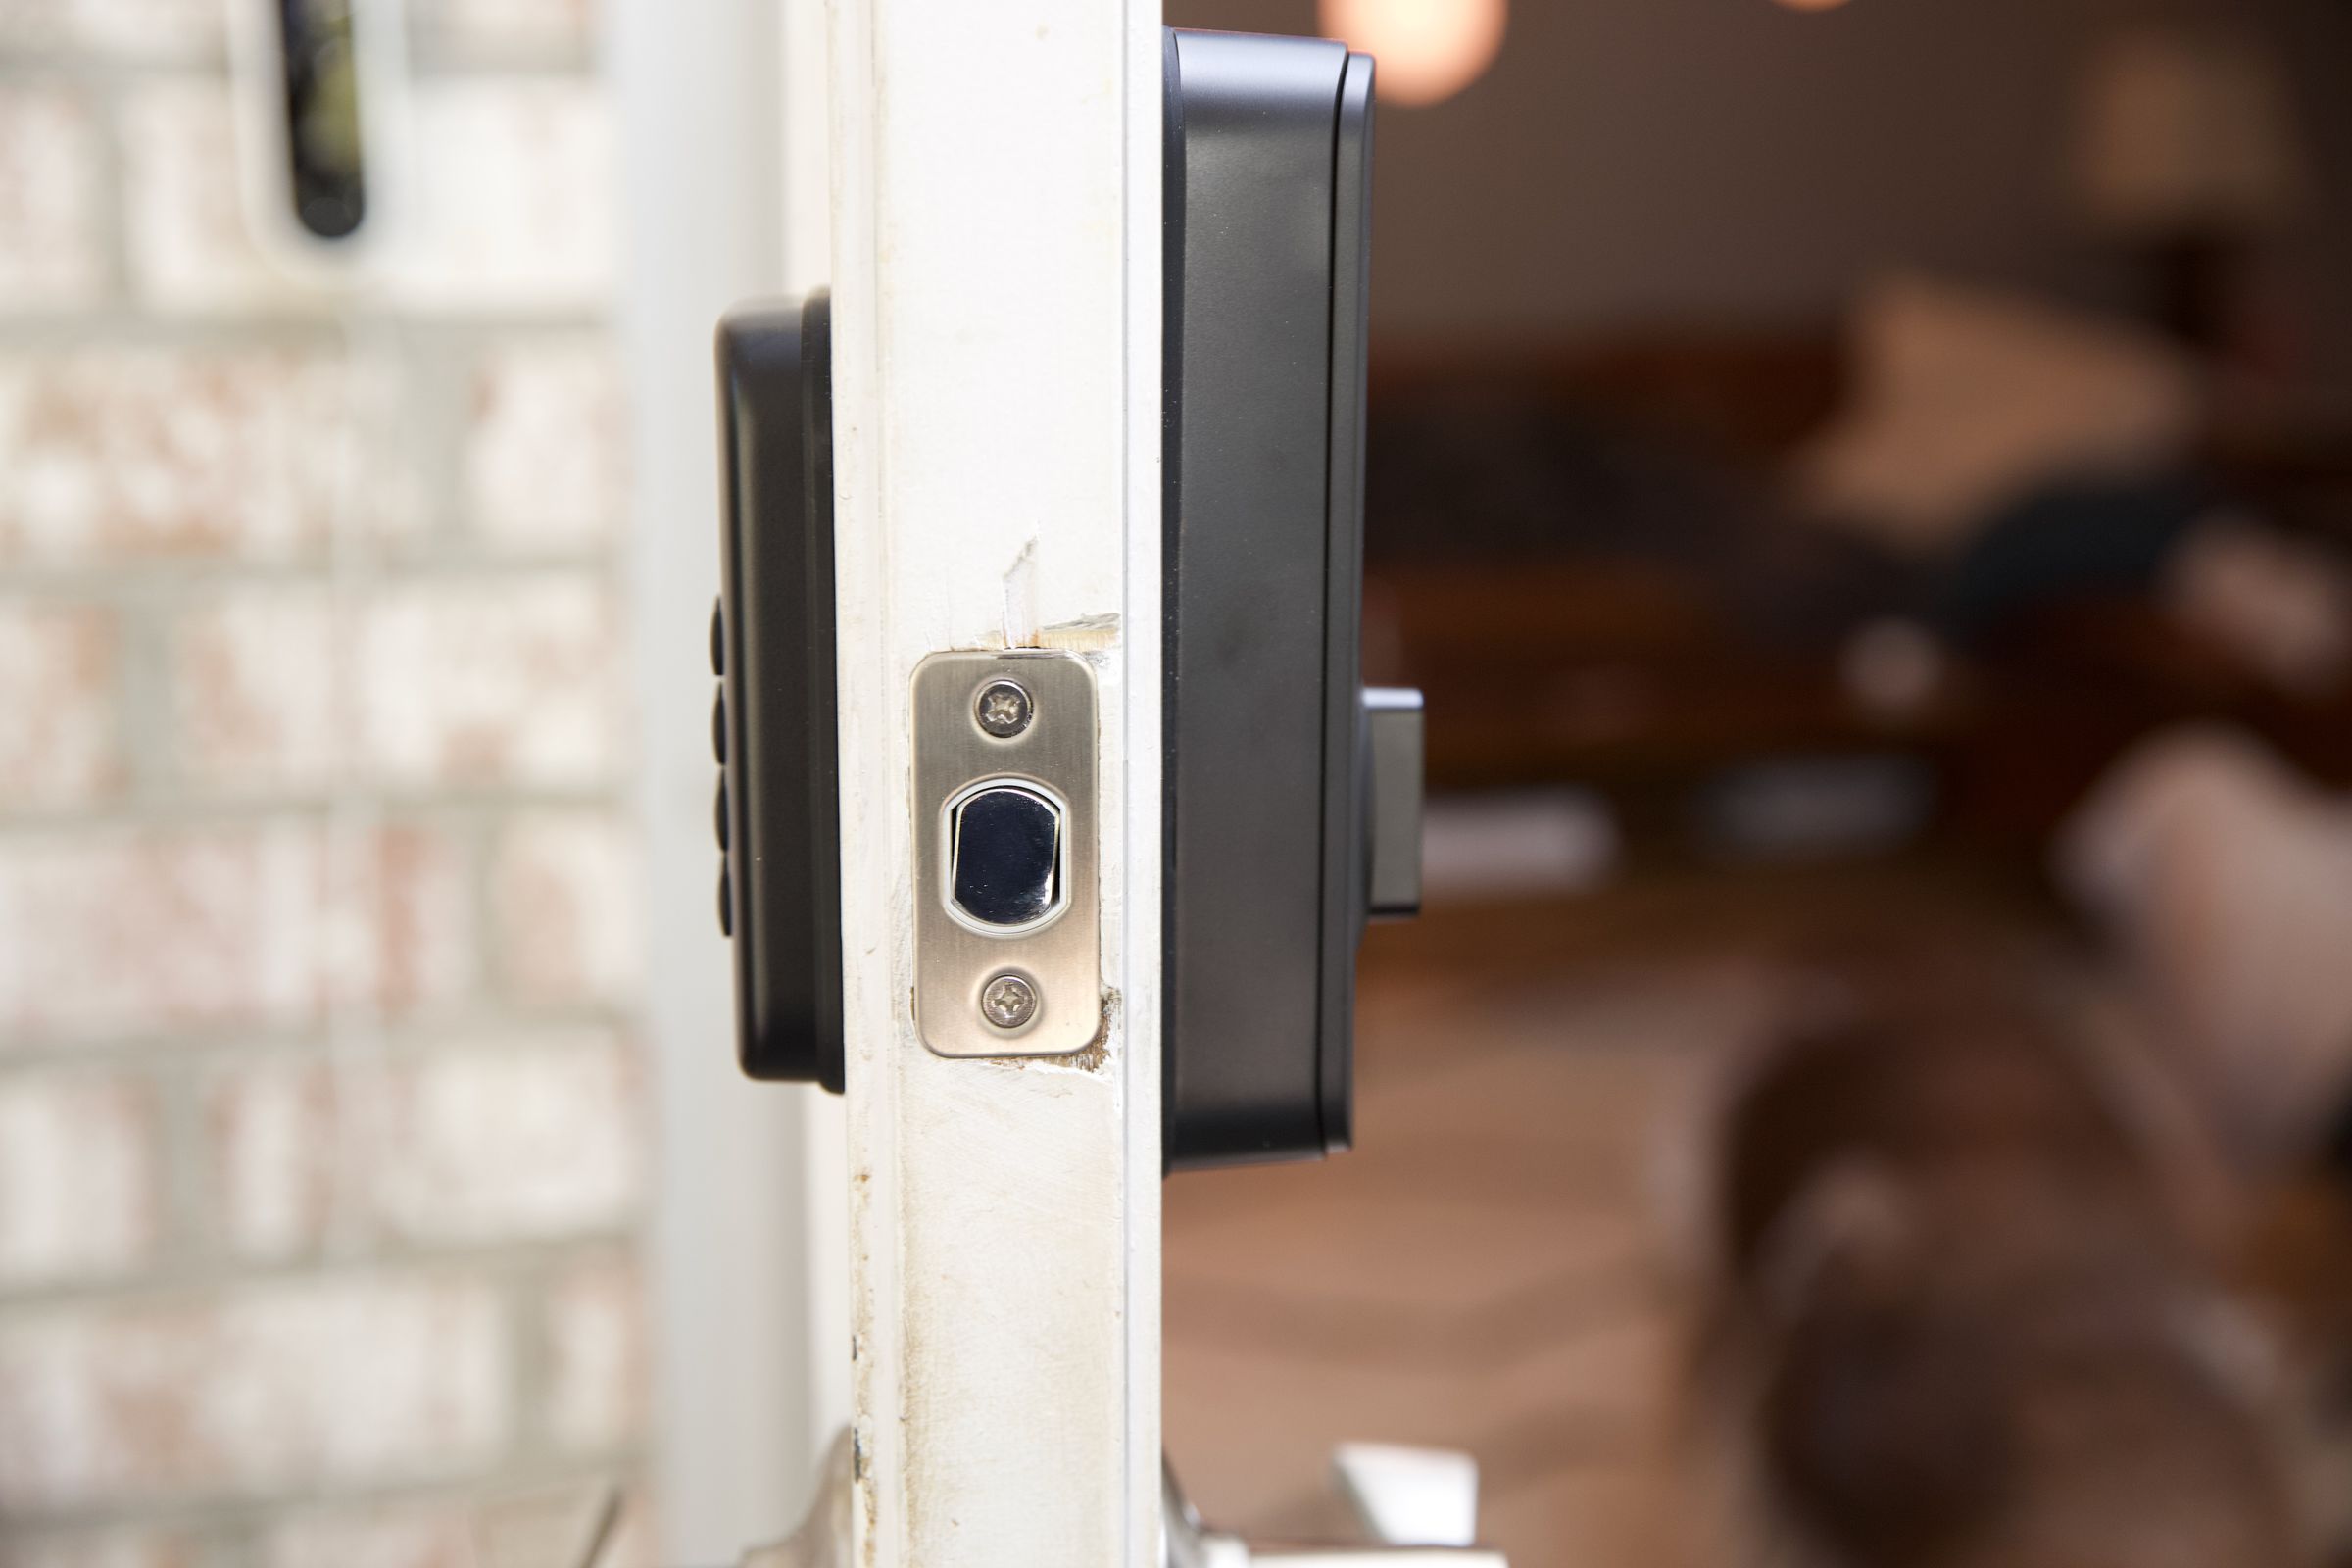 The Wyze lock has a huge rear housing but a nice slimline keypad, a fast fingerprint reader, and no Wi-Fi connection.